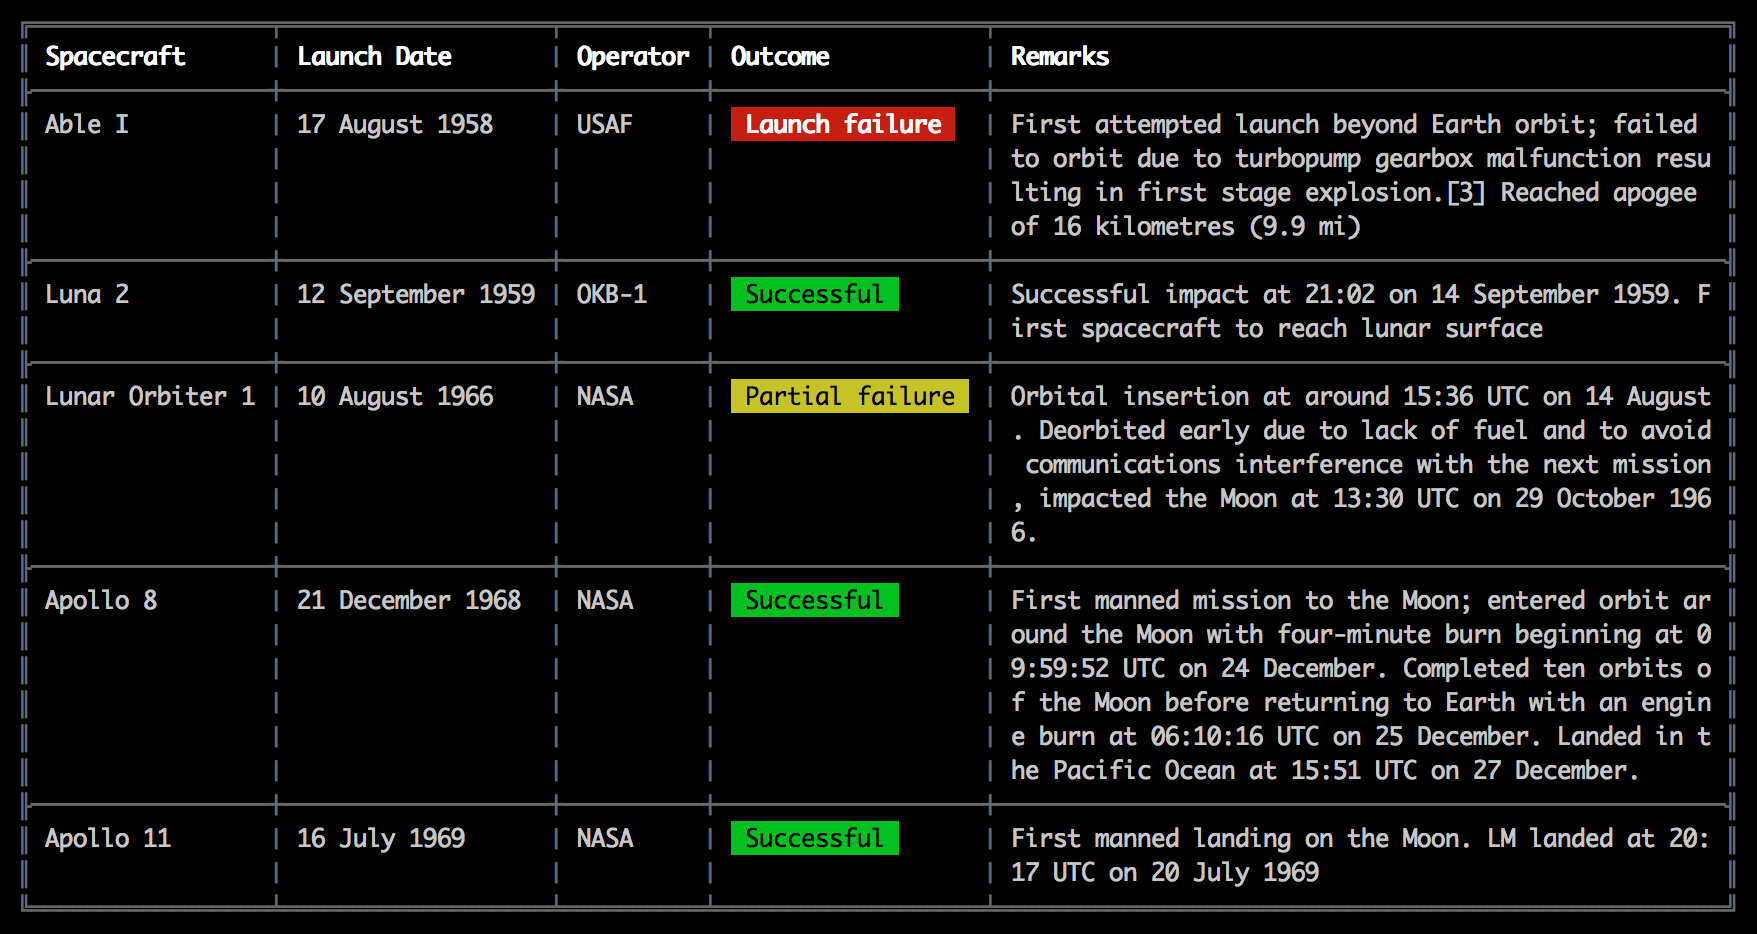 Demo of table displaying a list of missions to the Moon.